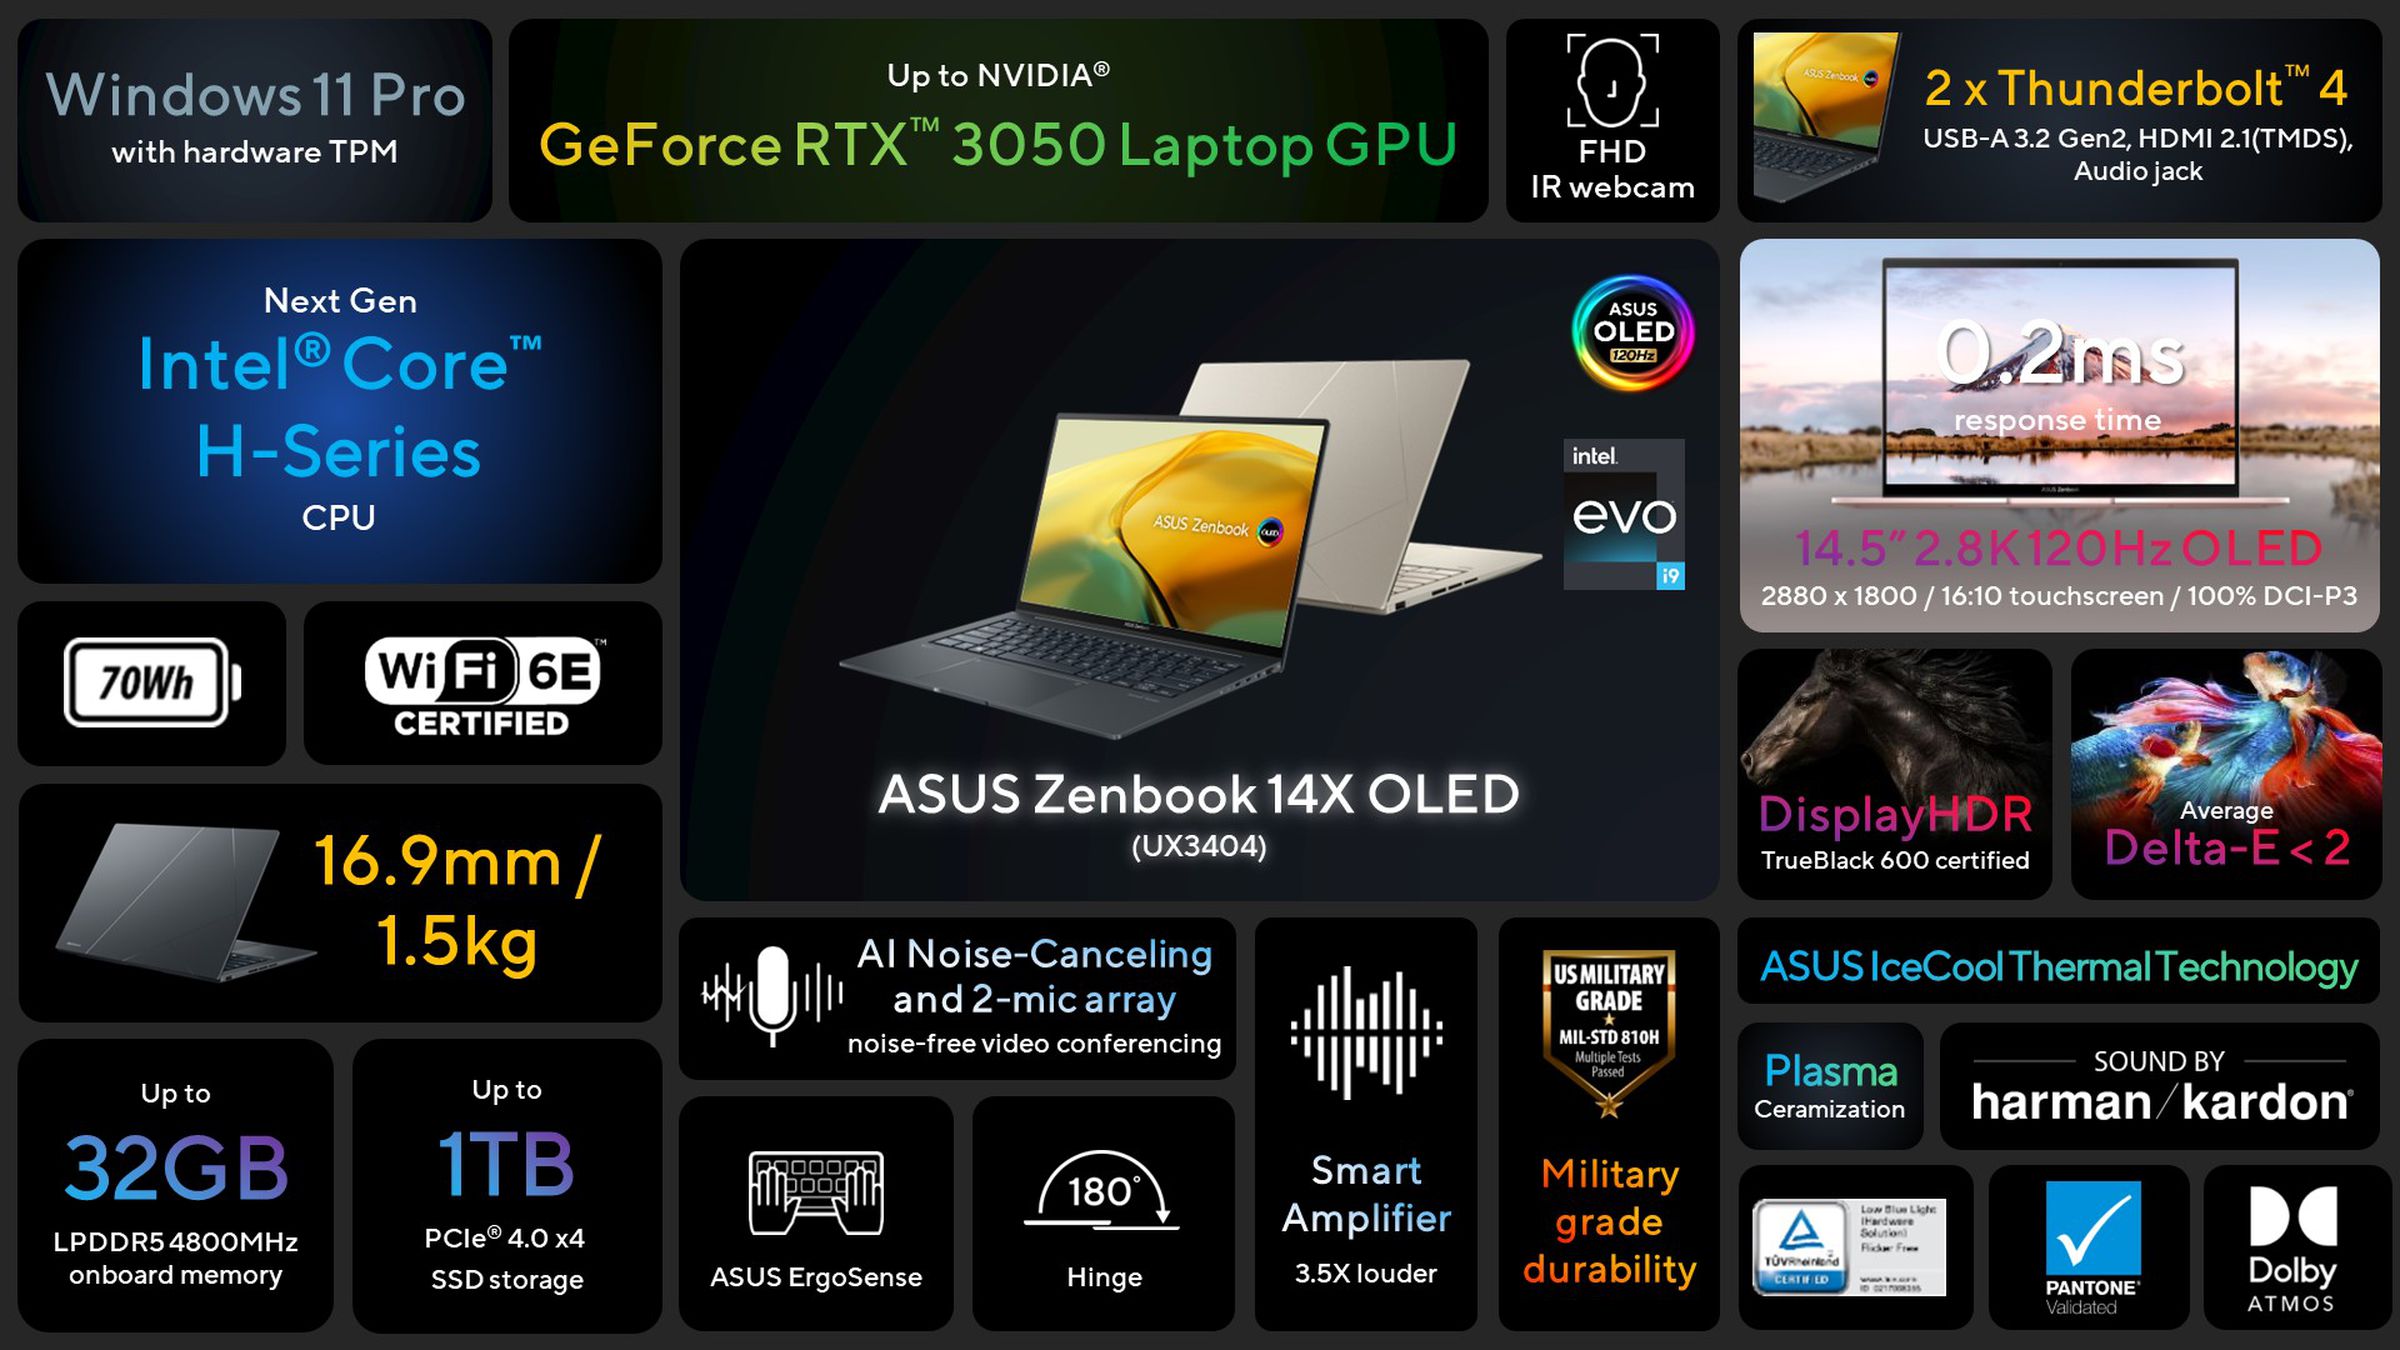 Asus Zenbook 14X OLED, not to be confused with the Pro.